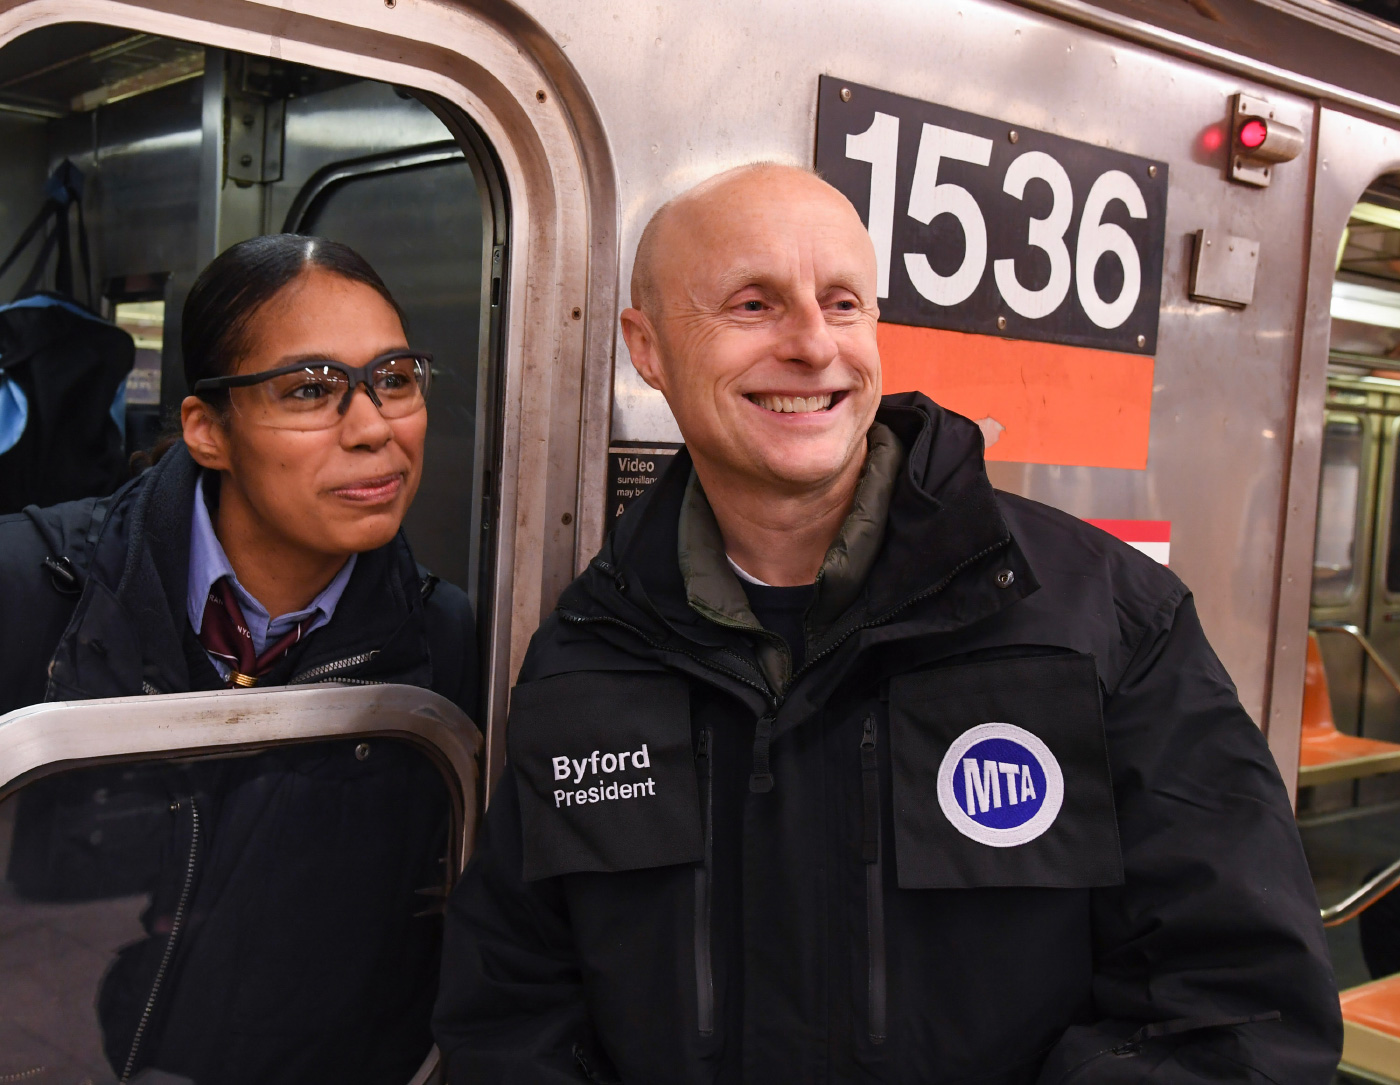 A smiling bald man, Andy Byford, in front of a train